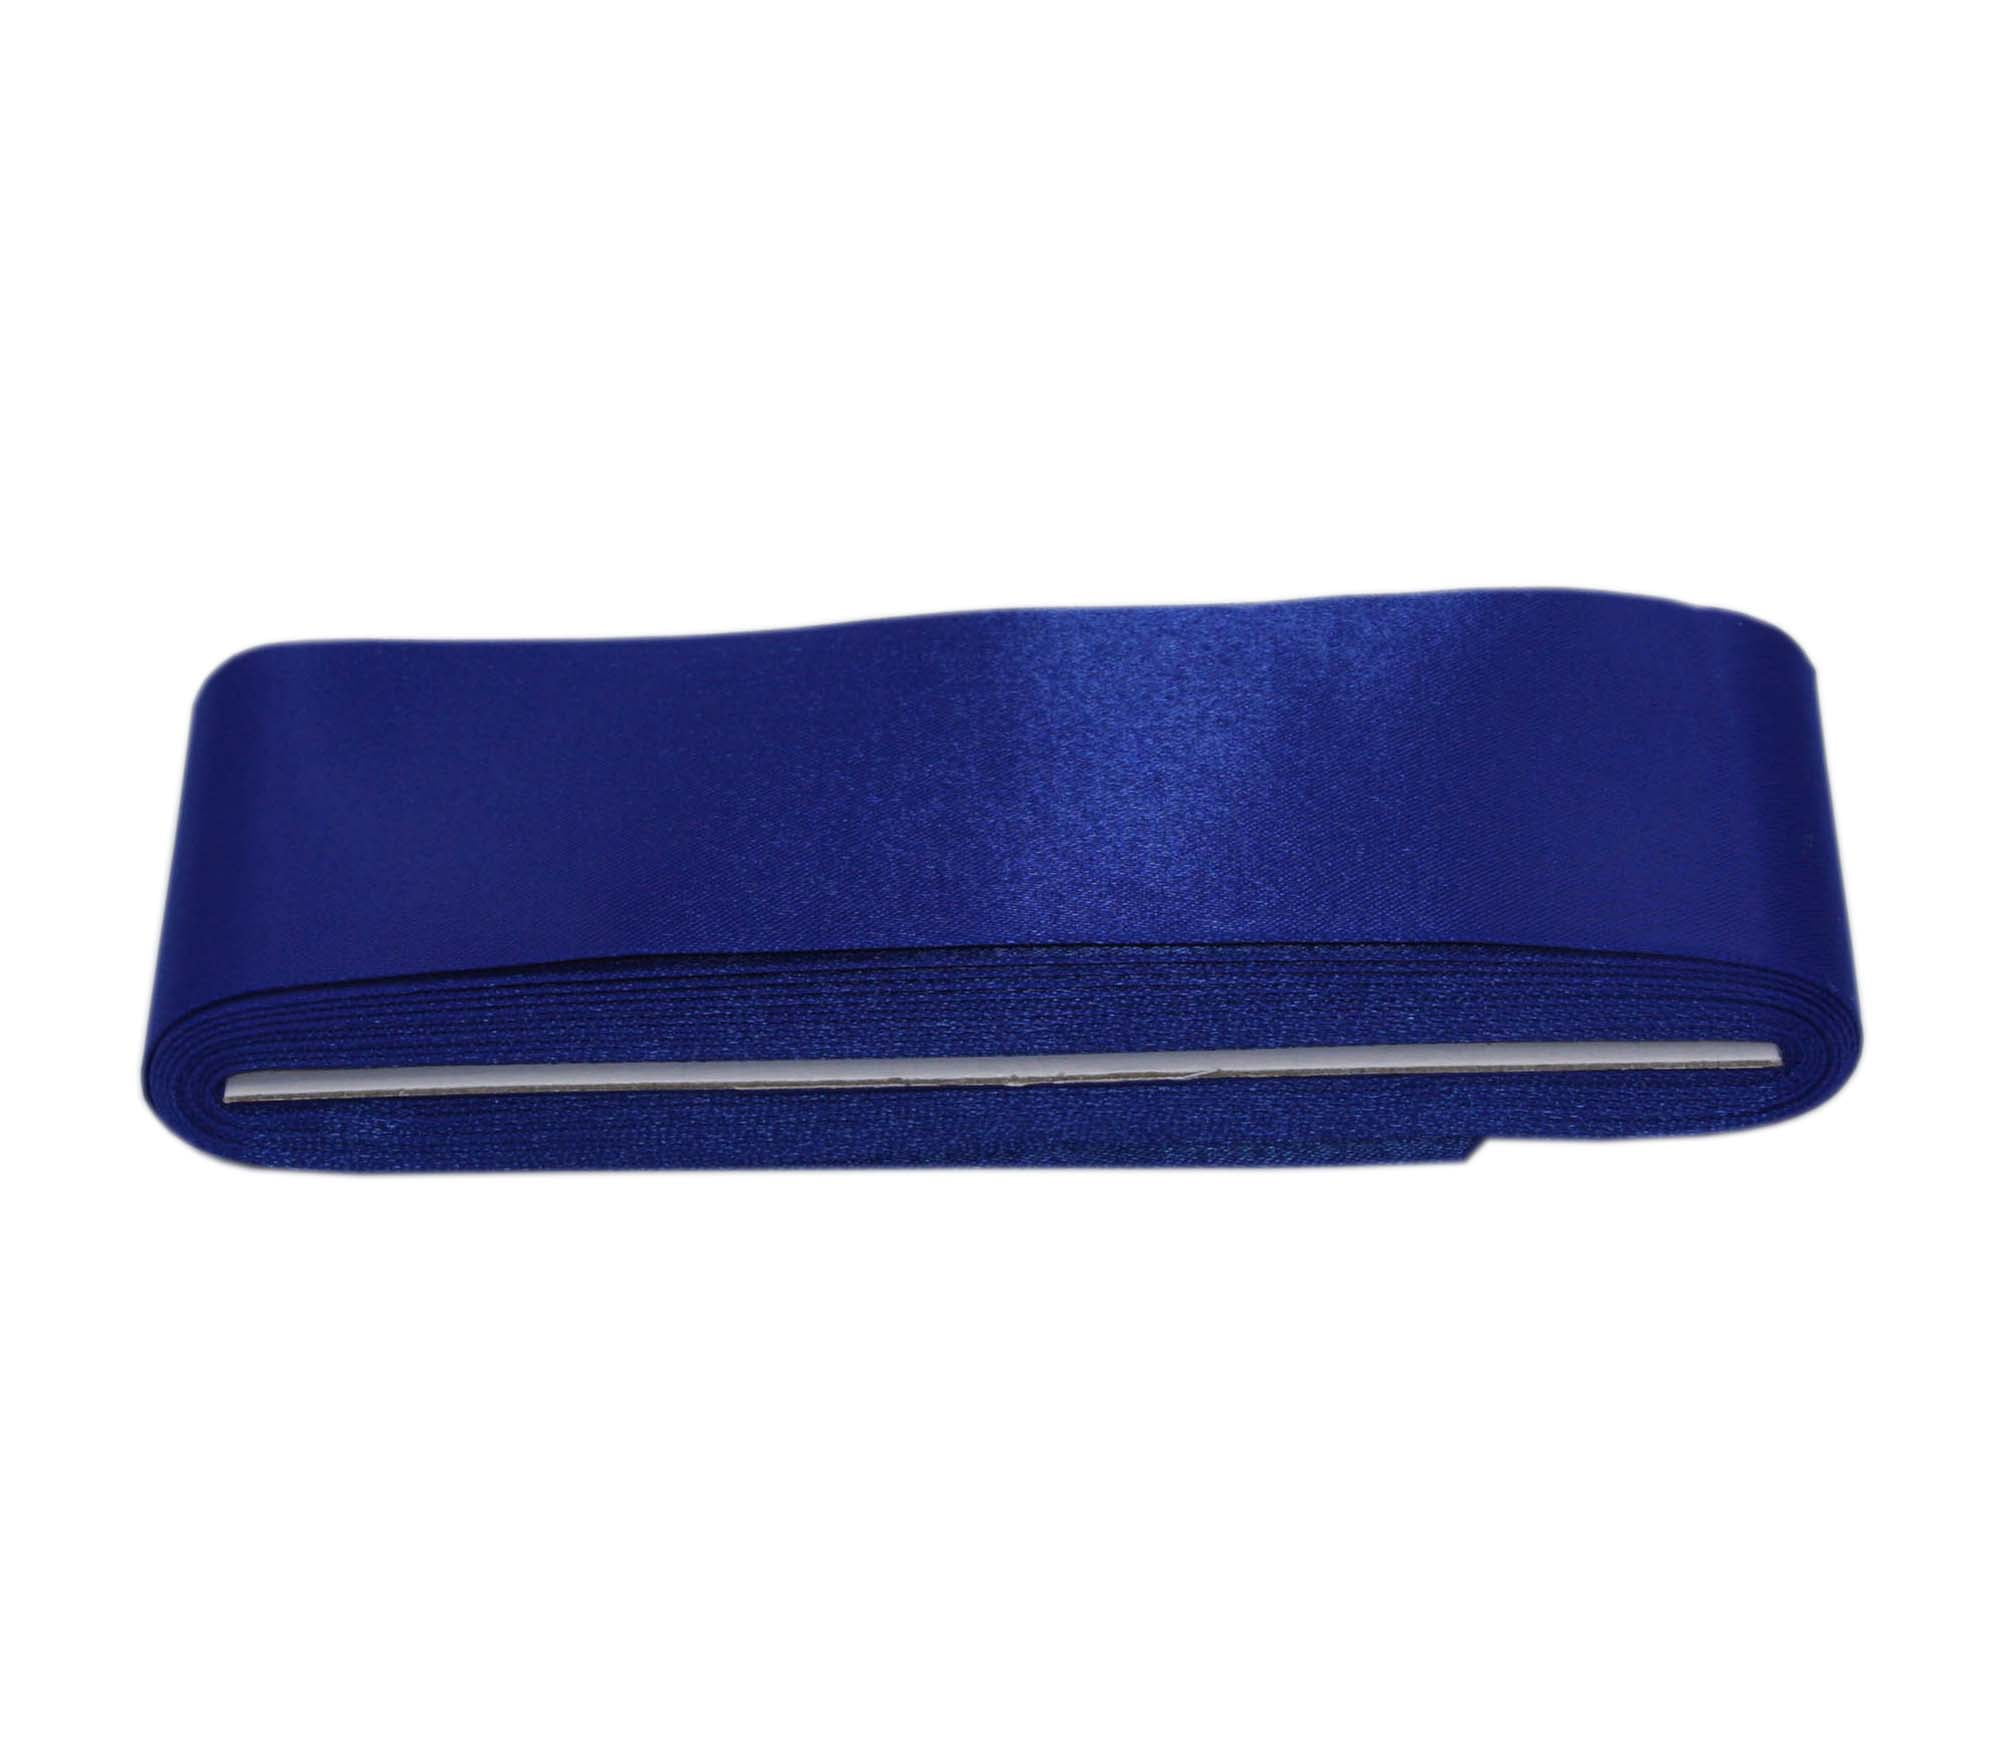 Wrights Blanket Binding, Yale Blue, 2 Non Bias Satin Blanket Binding for  Sewing and Crafts, 4.75 Yards, 1 Each 